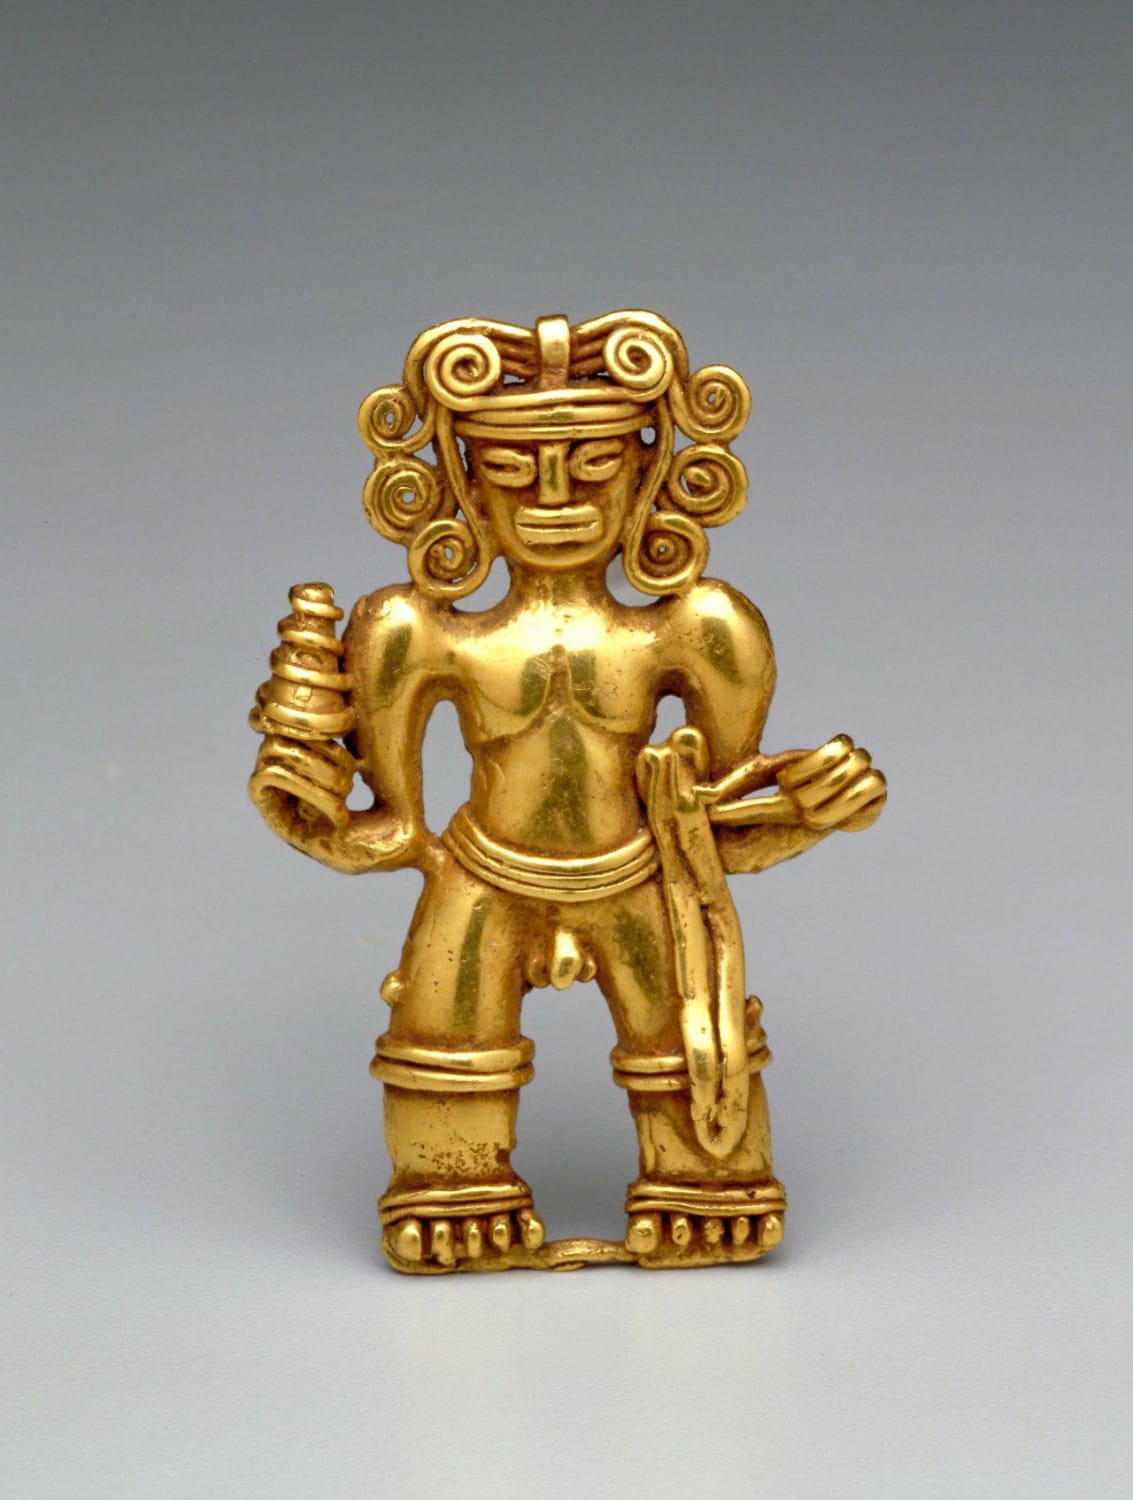 A solid gold pendant of the Ngäbe/Guaymí people of Central America (Panama & Costa Rica), circa 8th-15th century.